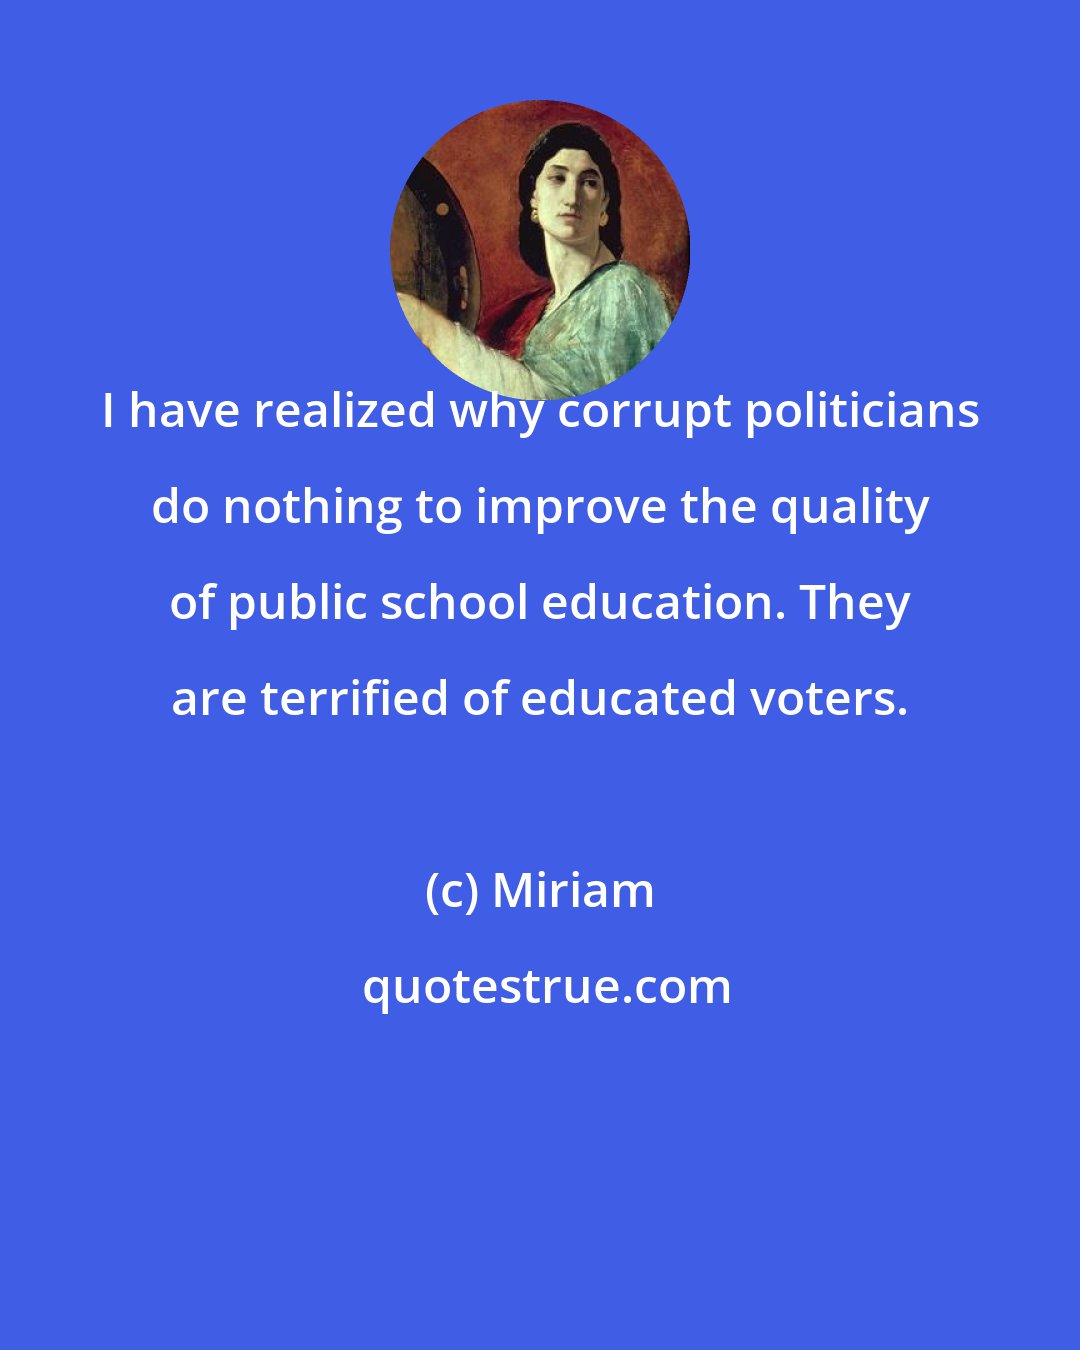 Miriam: I have realized why corrupt politicians do nothing to improve the quality of public school education. They are terrified of educated voters.